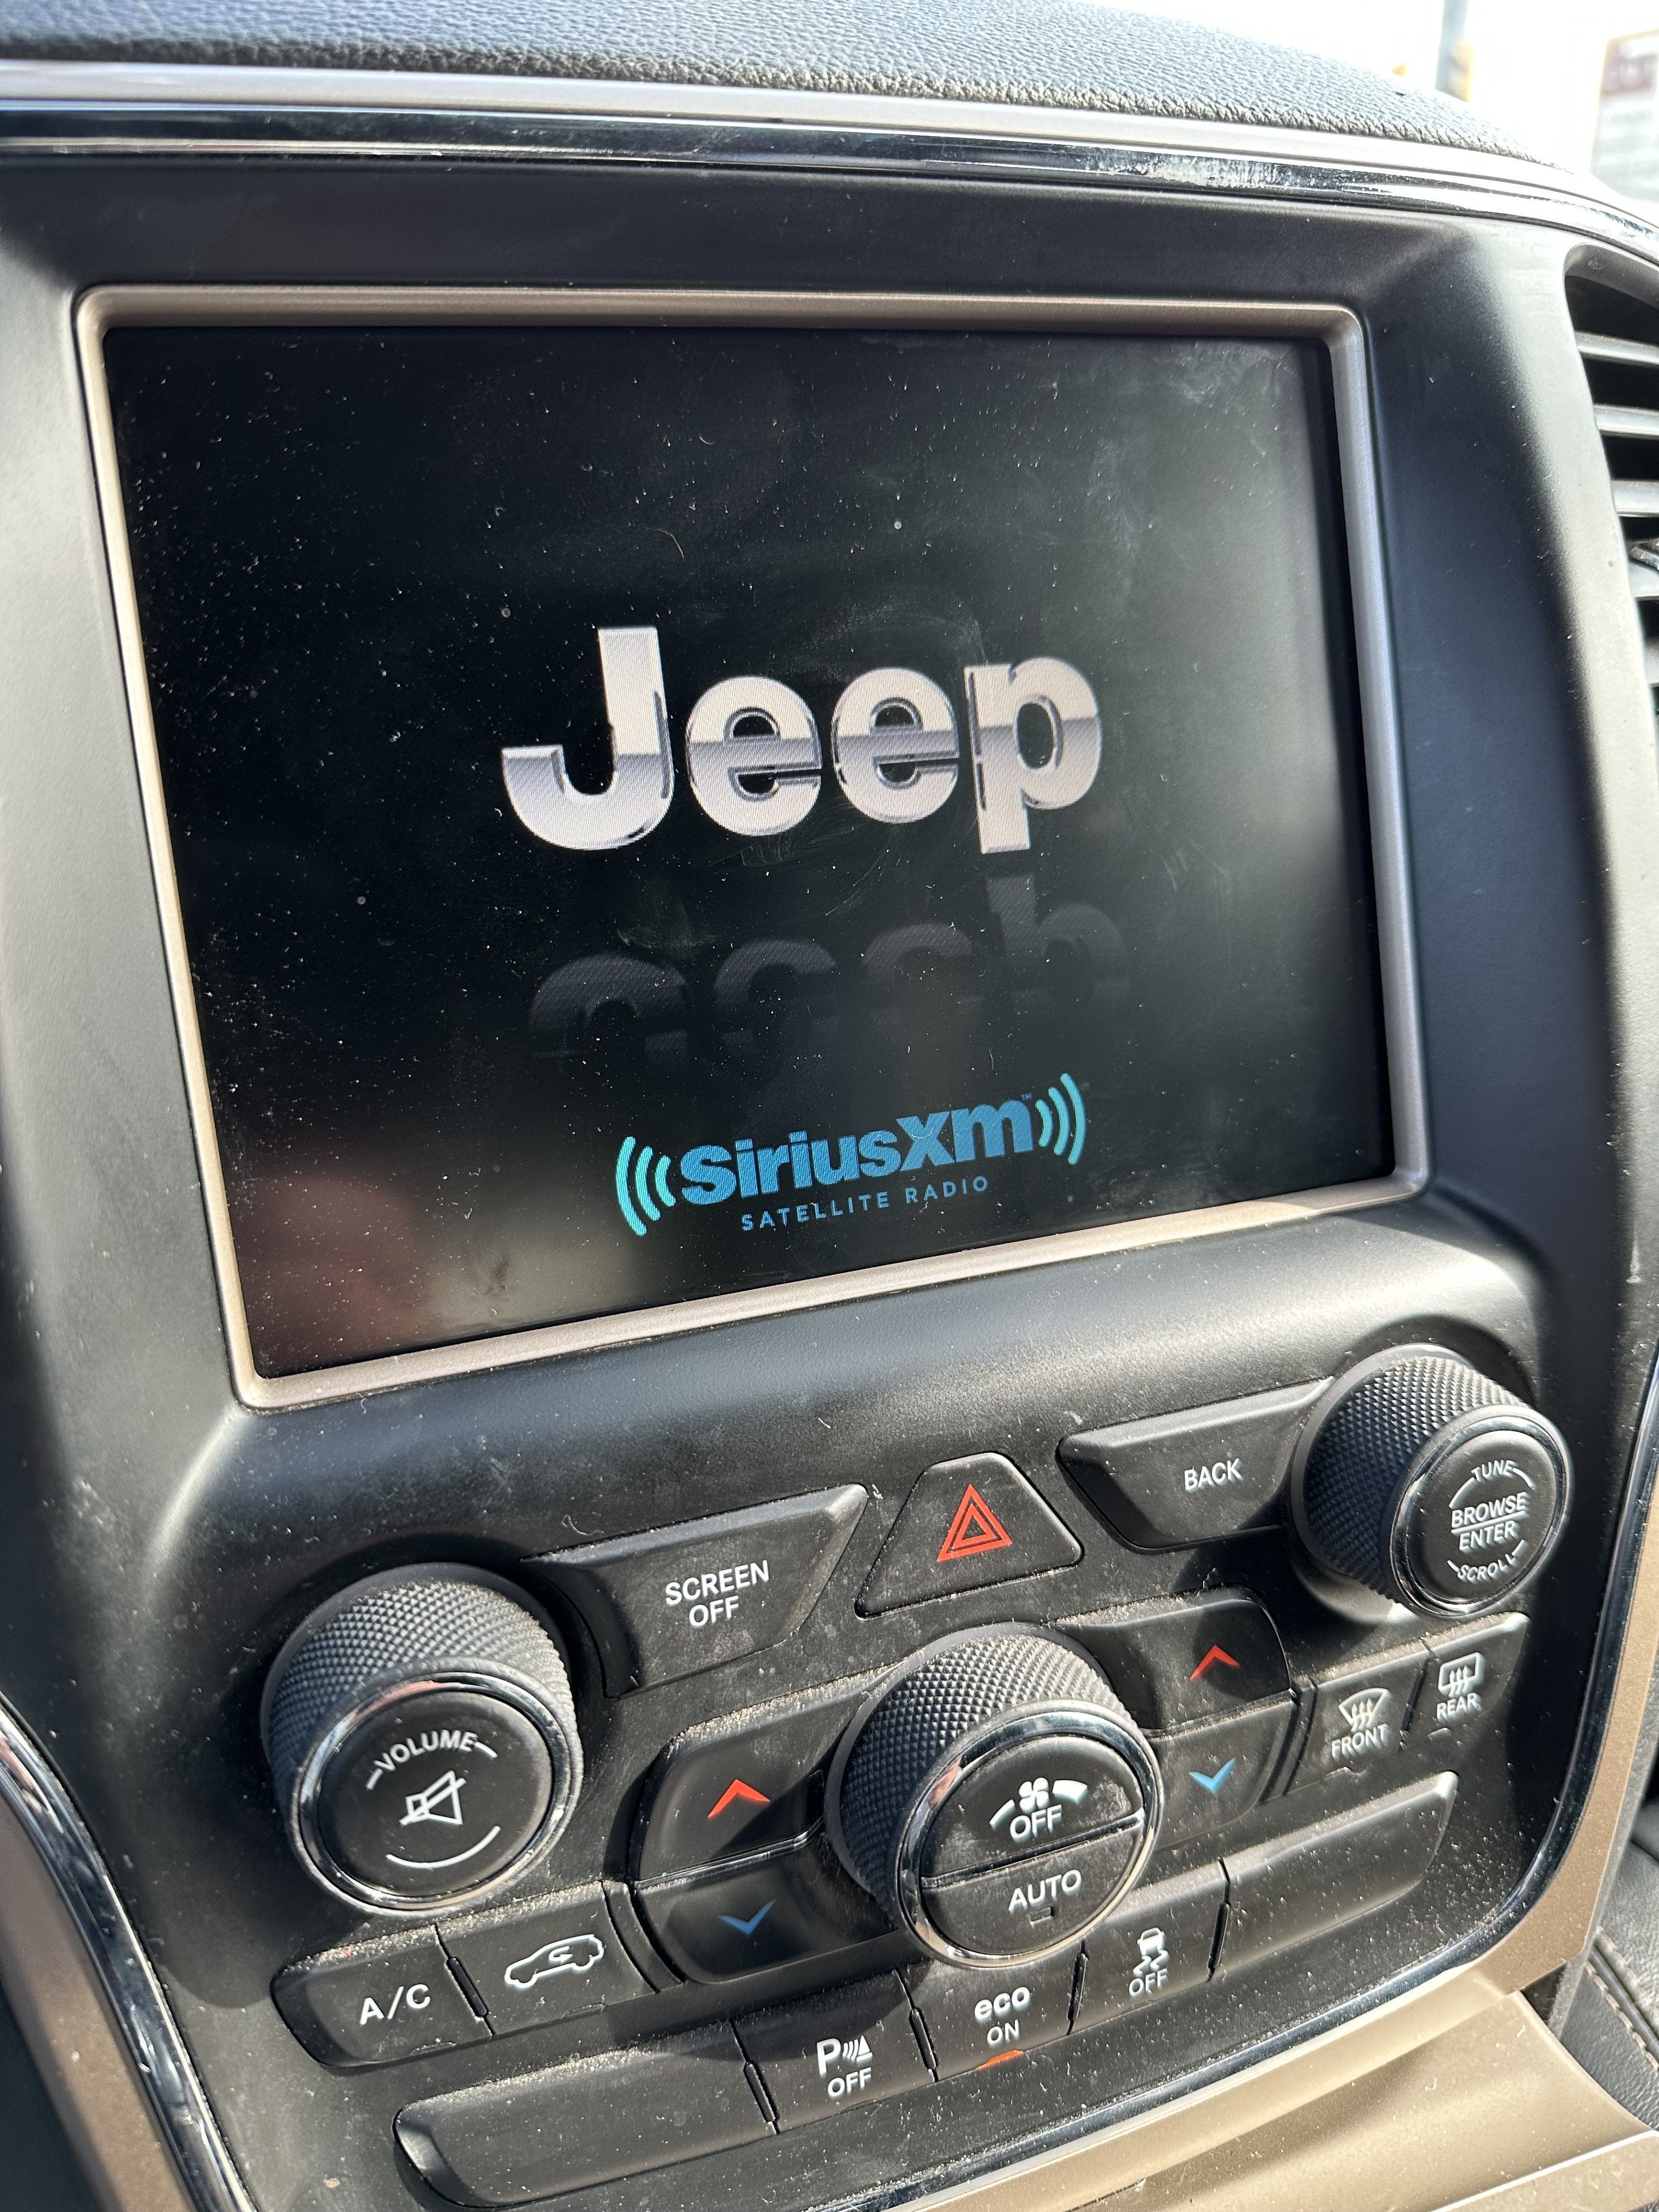 Uconnect screen blank or stuck on Jeep logo screen | Jeep Garage - Jeep  Forum